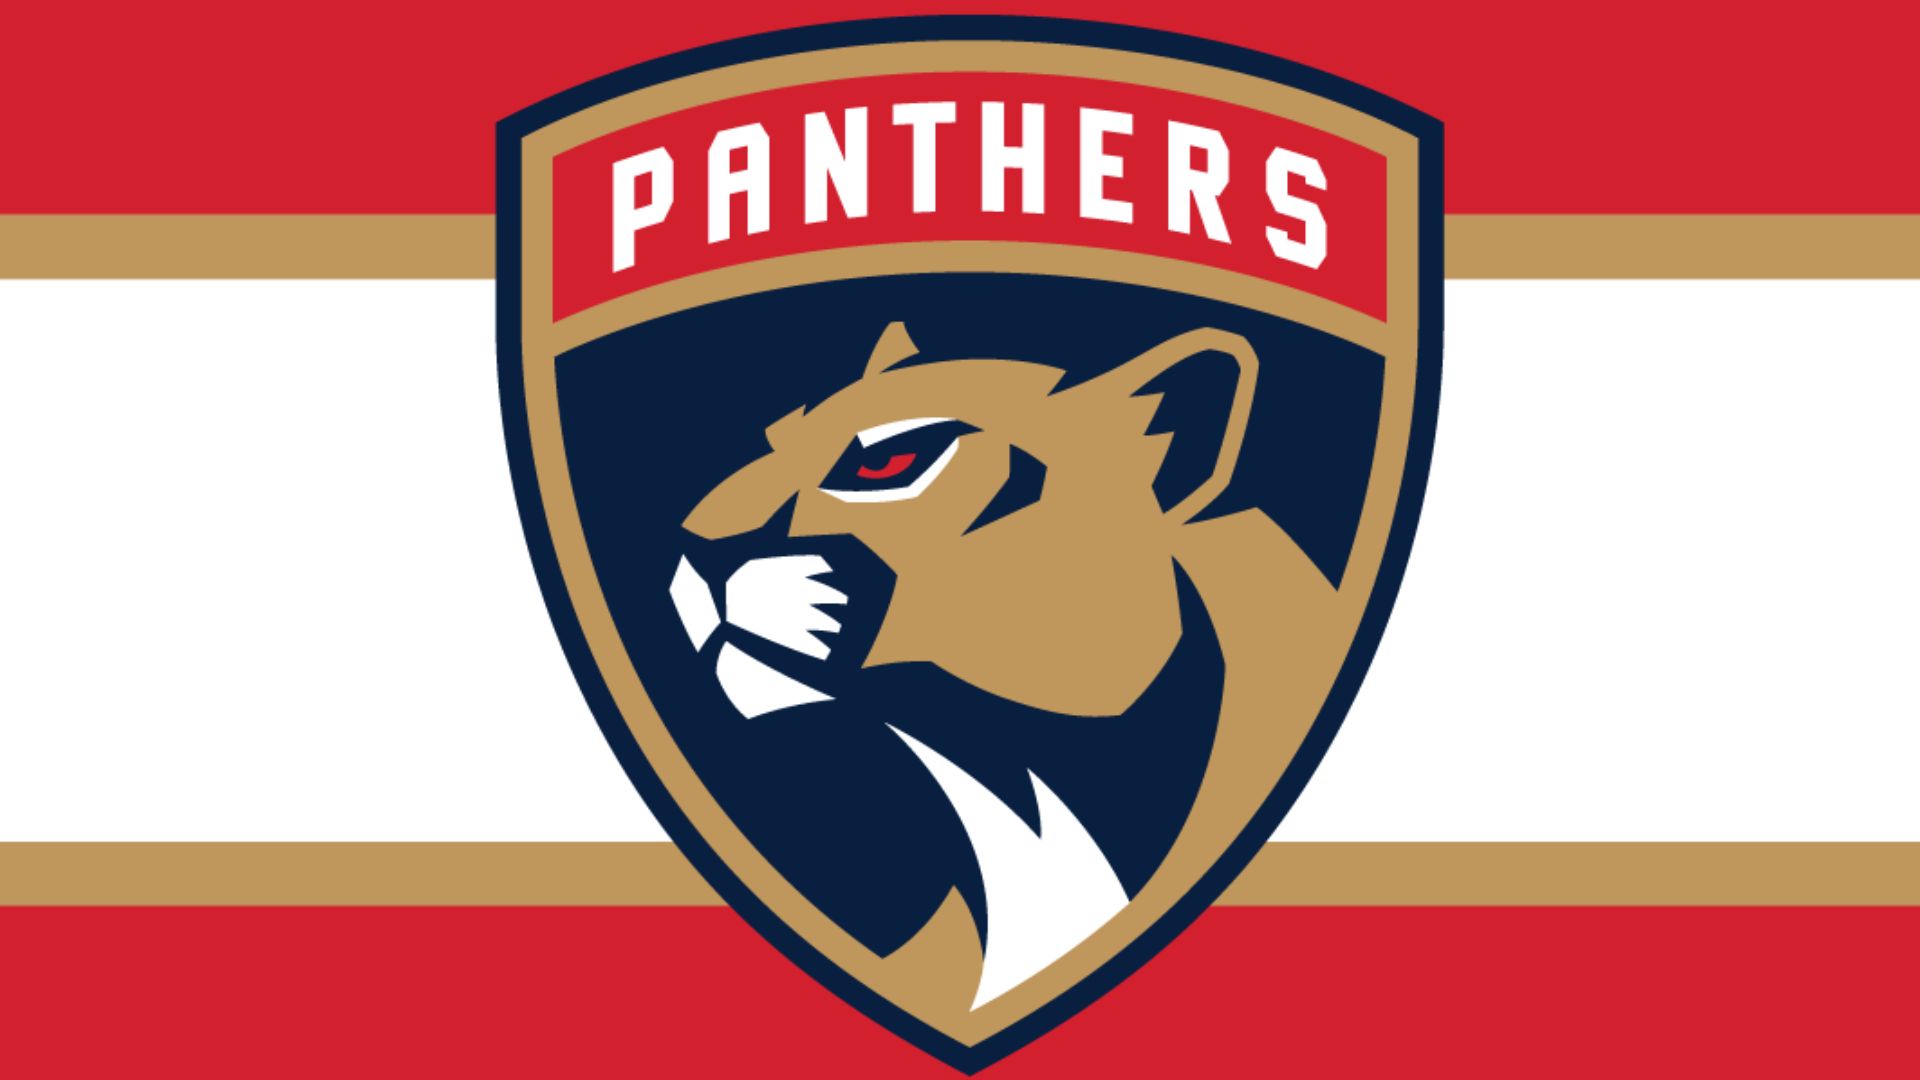 Ryan Lomberg scores late winner, Panthers defeat Capitals 4-2 – WSVN 7News | Miami Information, Weather conditions, Athletics | Fort Lauderdale